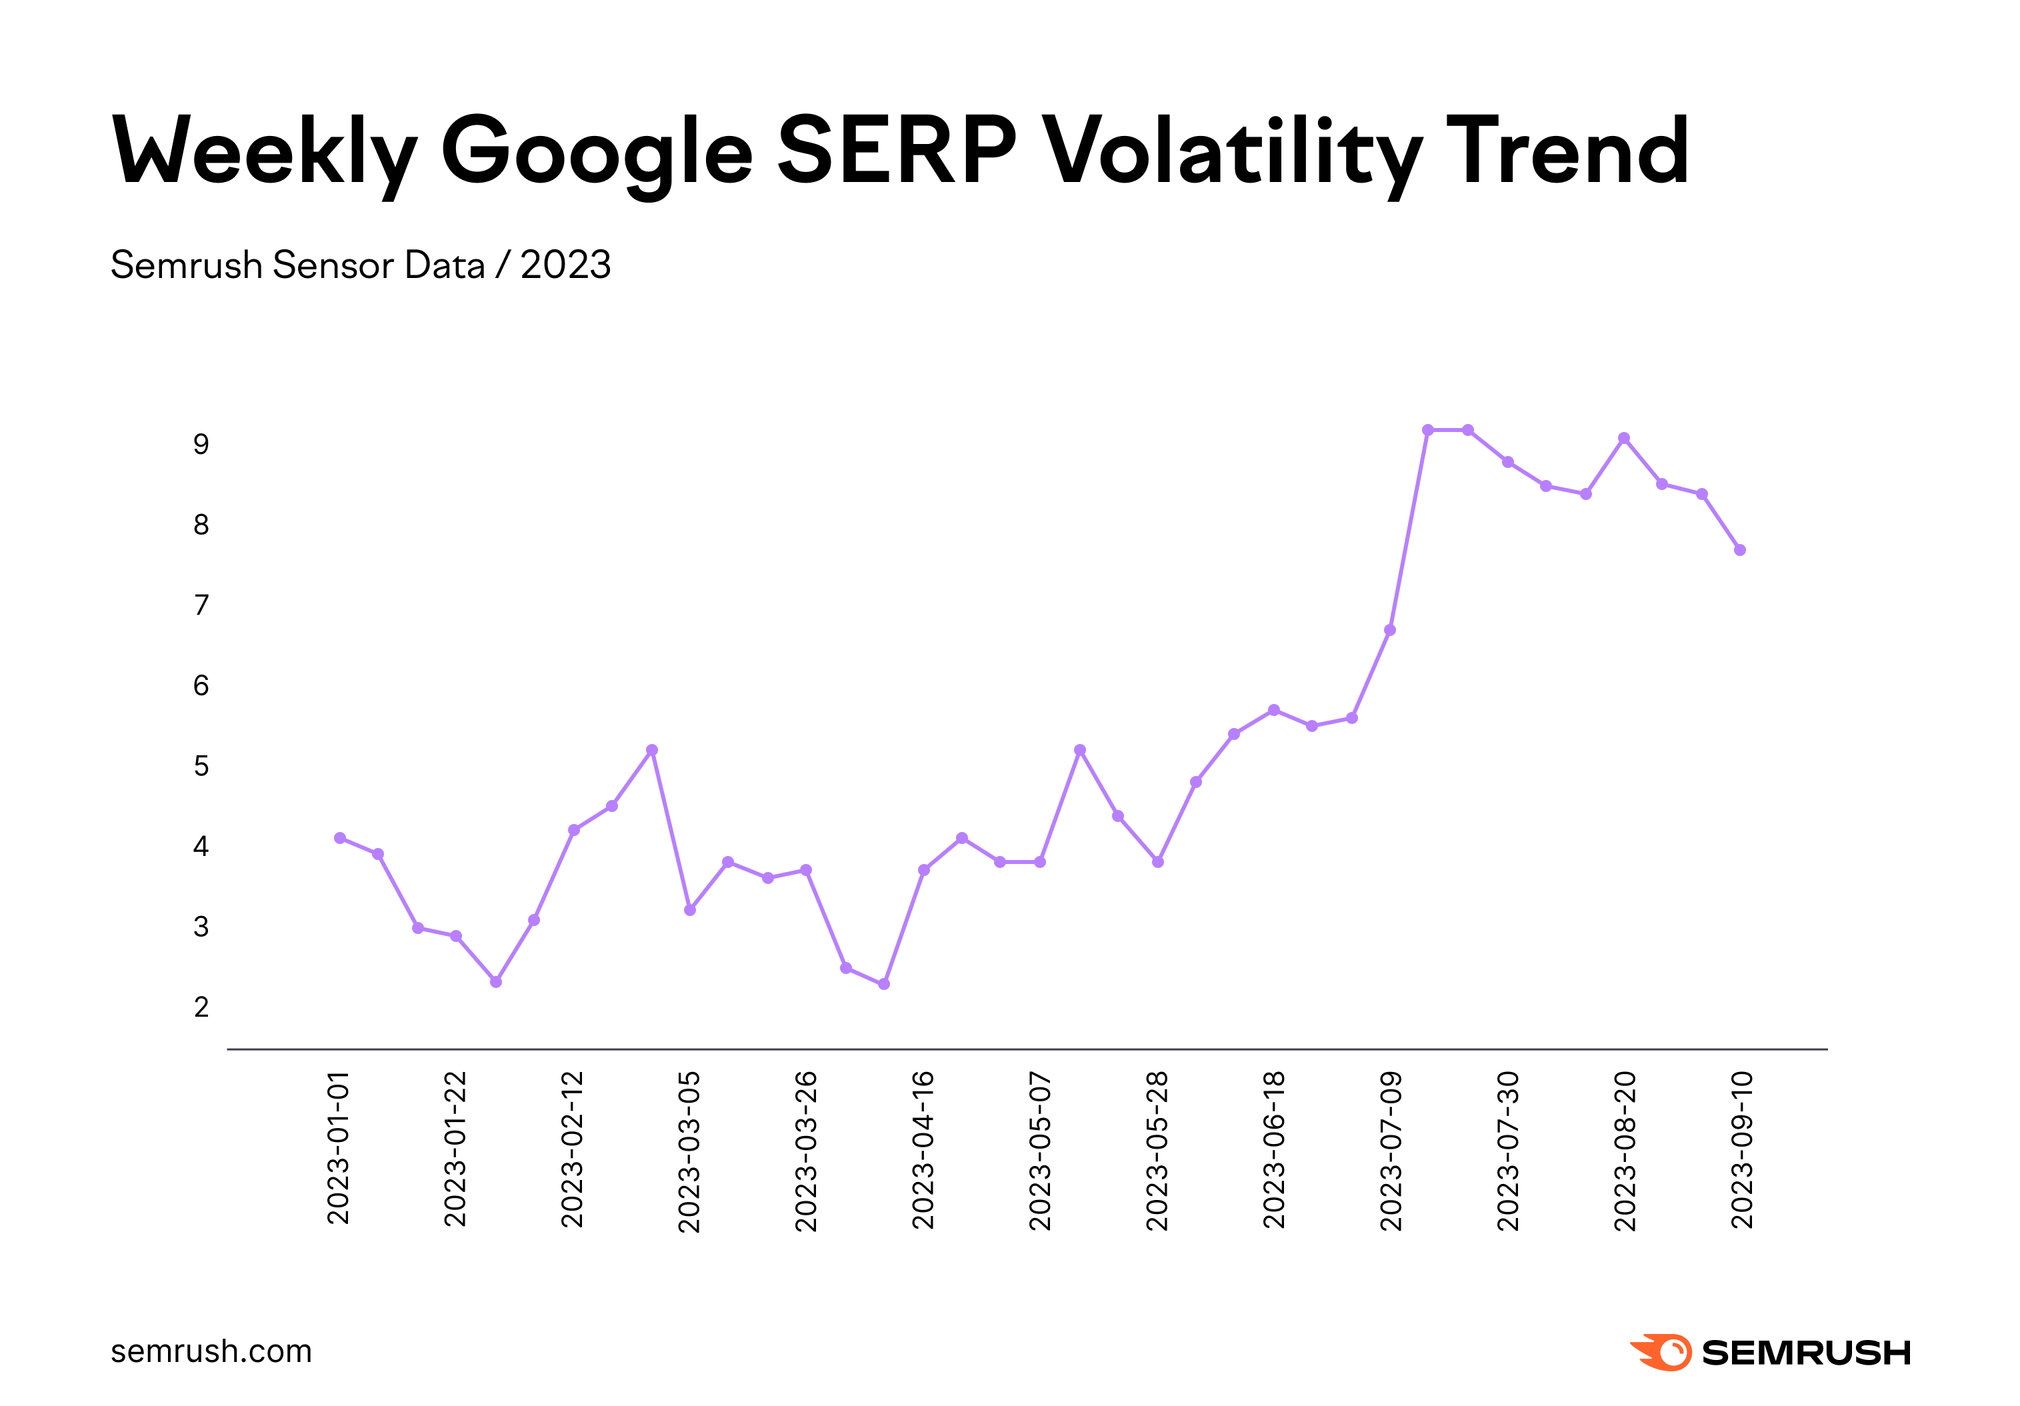 Graph showing weekly Google SERP volatility trends from January 2023 to September 2023.